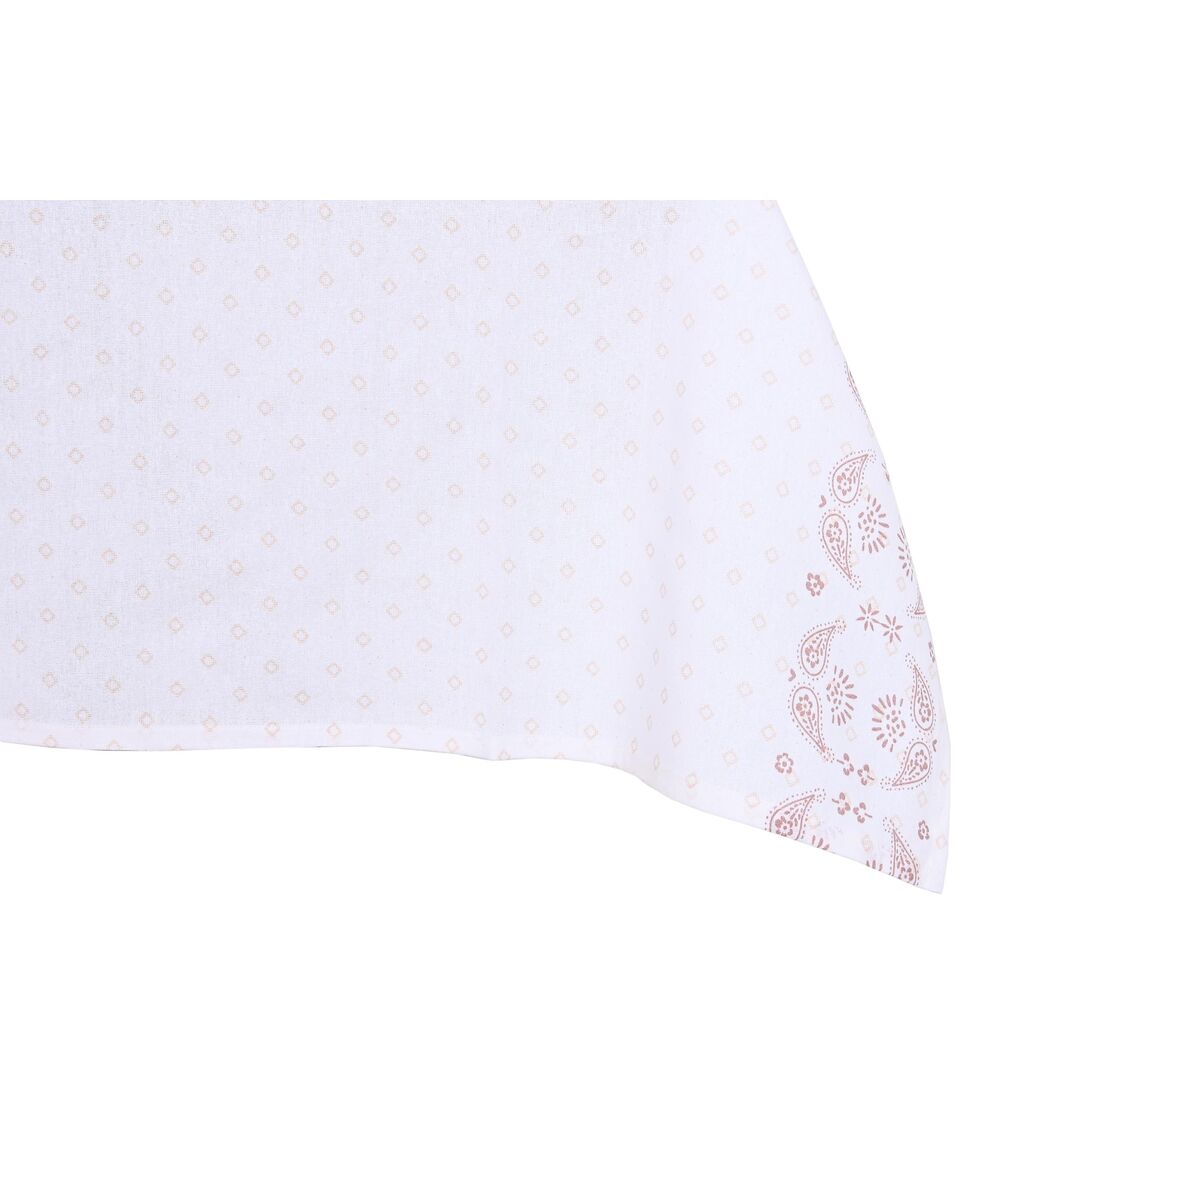 Tablecloth and napkins DKD Home Decor 150 x 150 x 0,5 cm Pink White (2 Units)